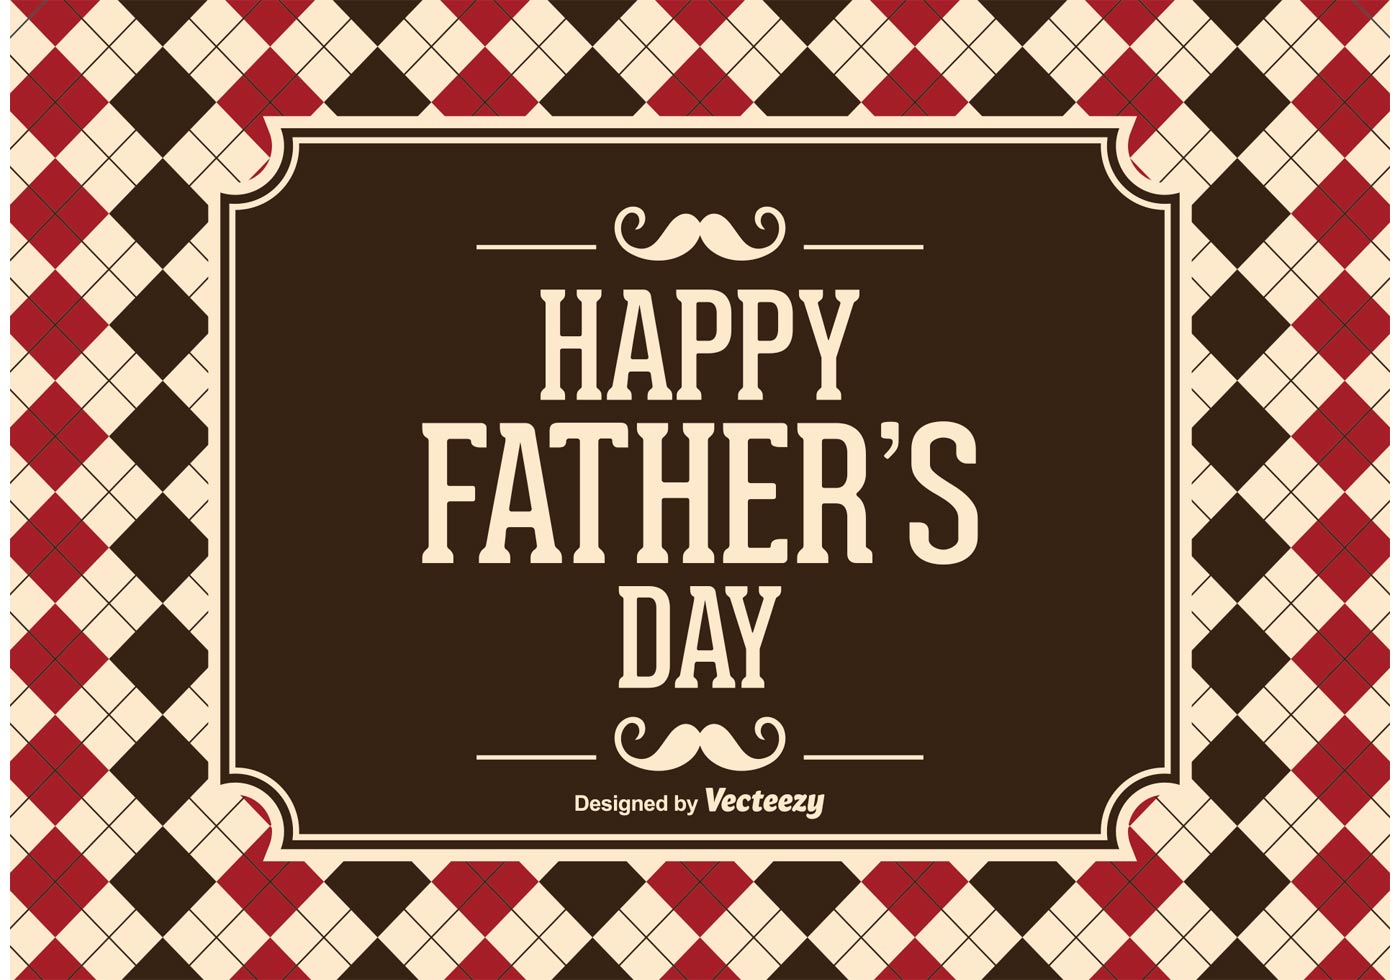 Download Father's Day Vector Illustration - Download Free Vector Art, Stock Graphics & Images